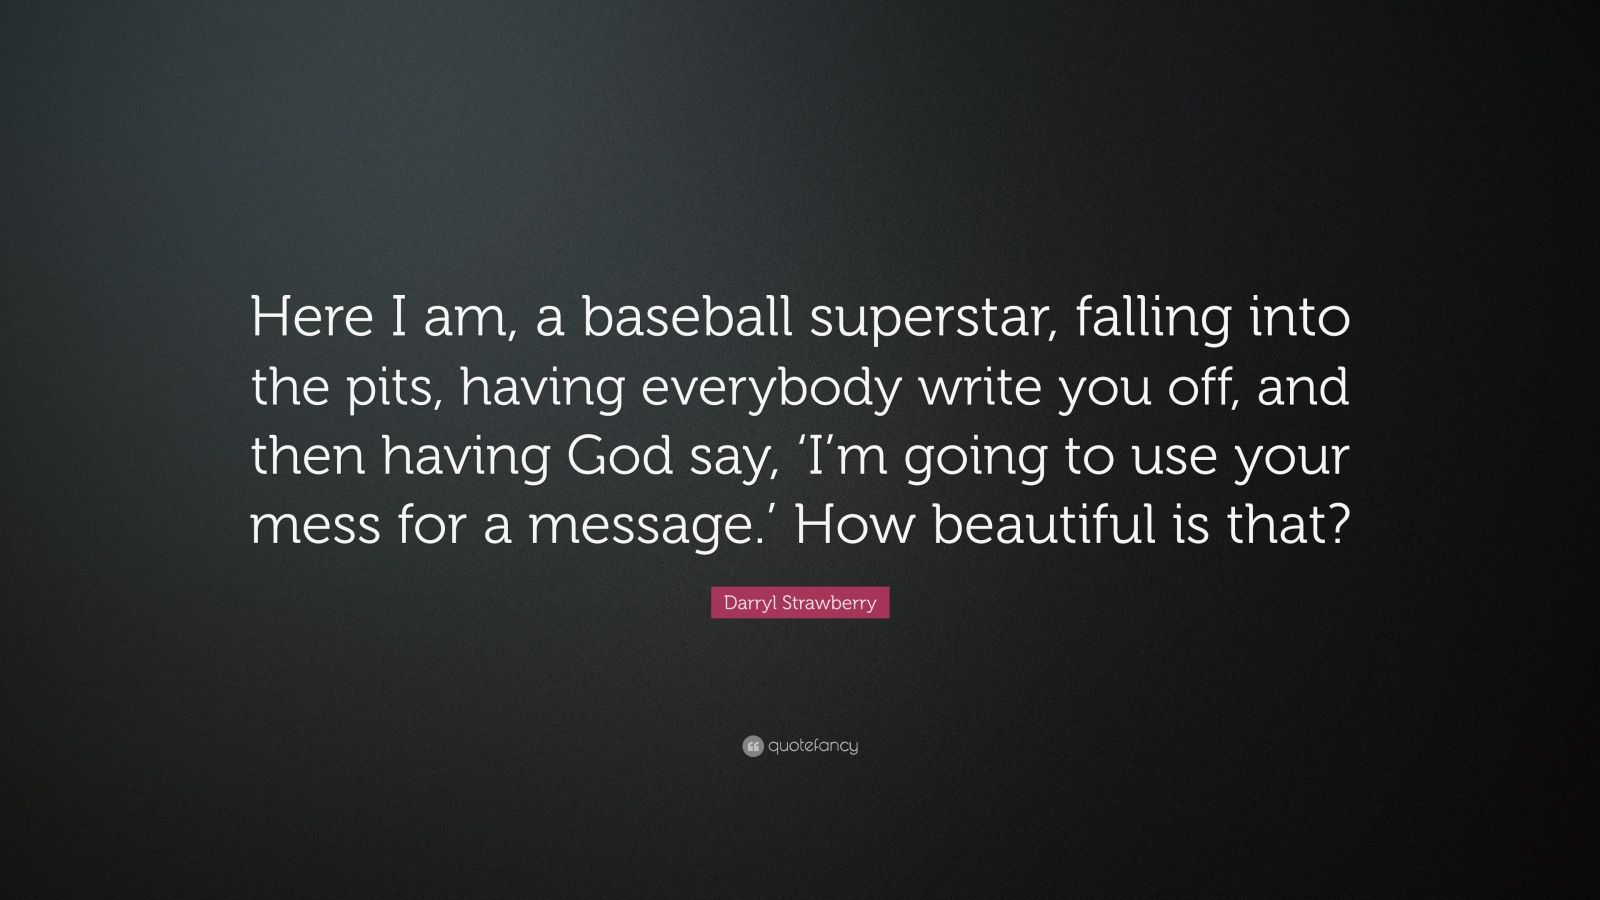 Darryl Strawberry Quotes (5 wallpapers) - Quotefancy